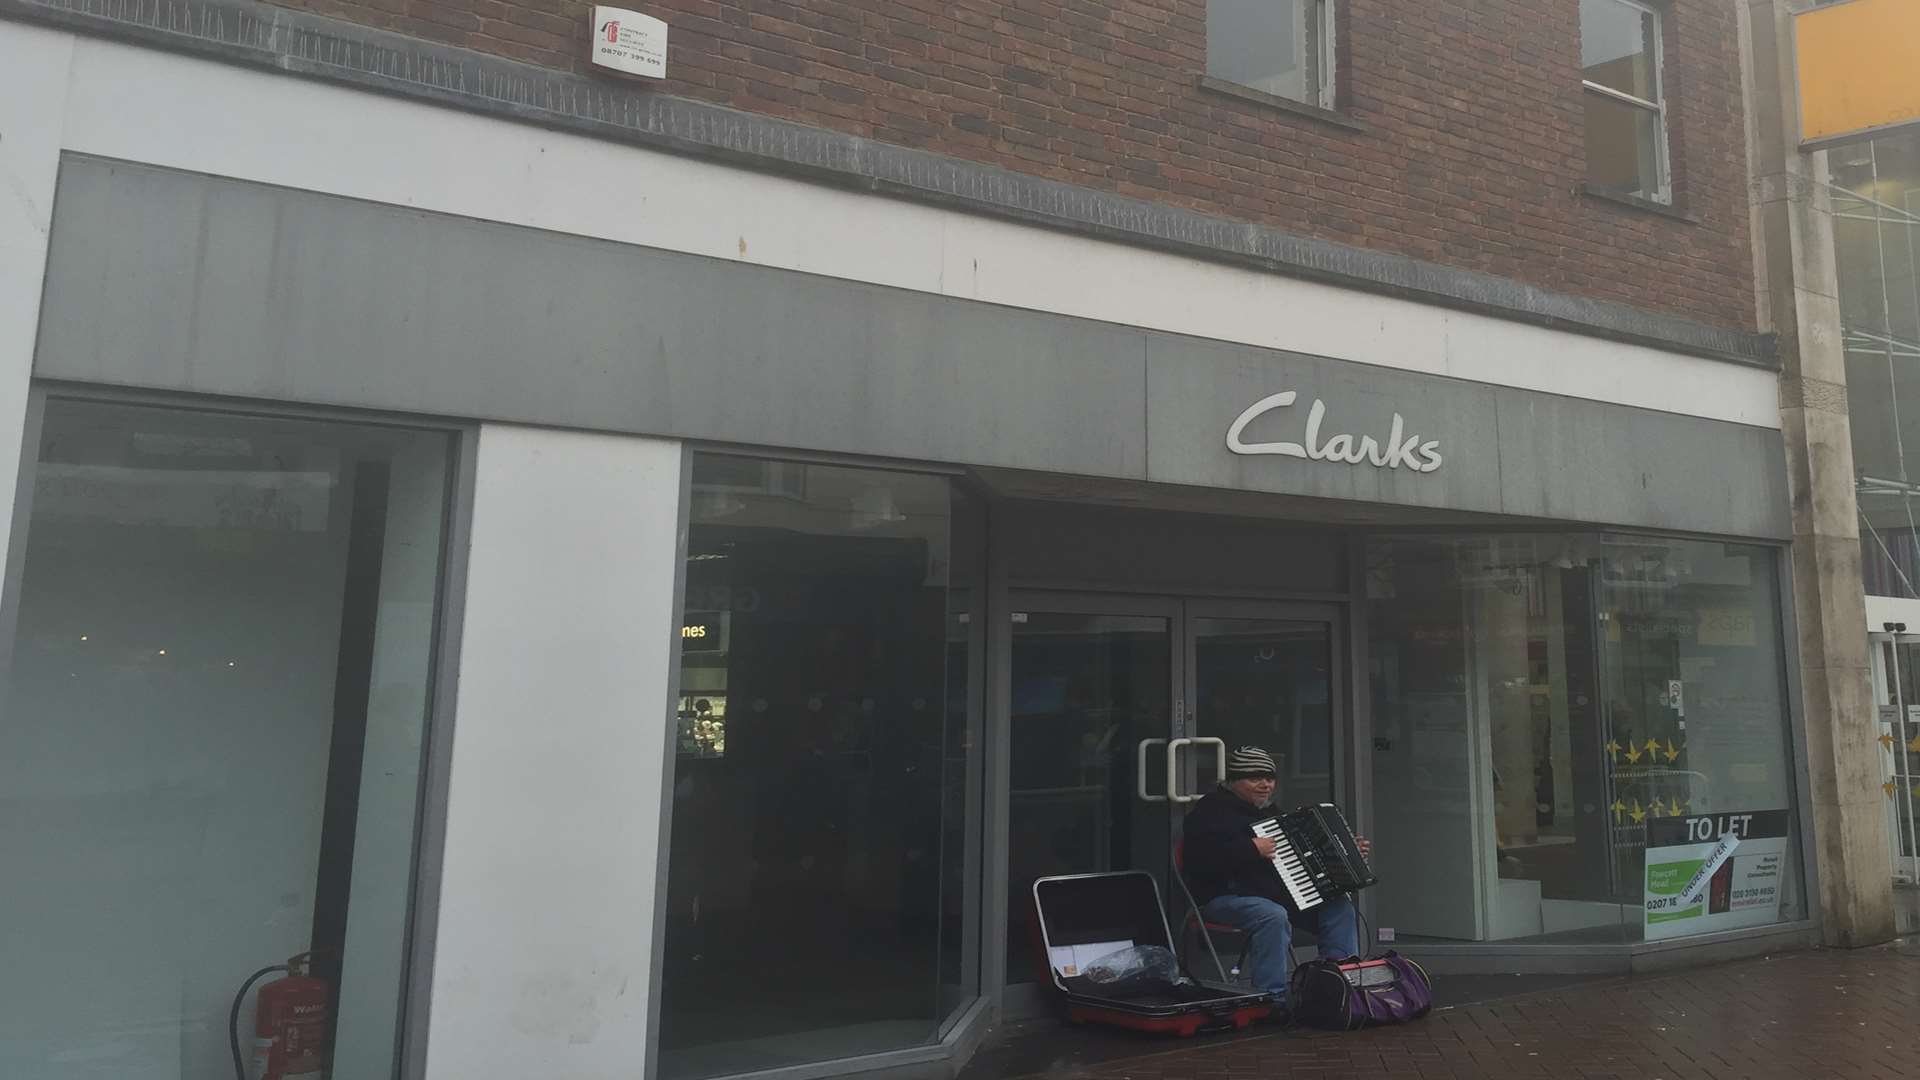 Clarks, which will re-open as a Nationwide, has been empty for over a year